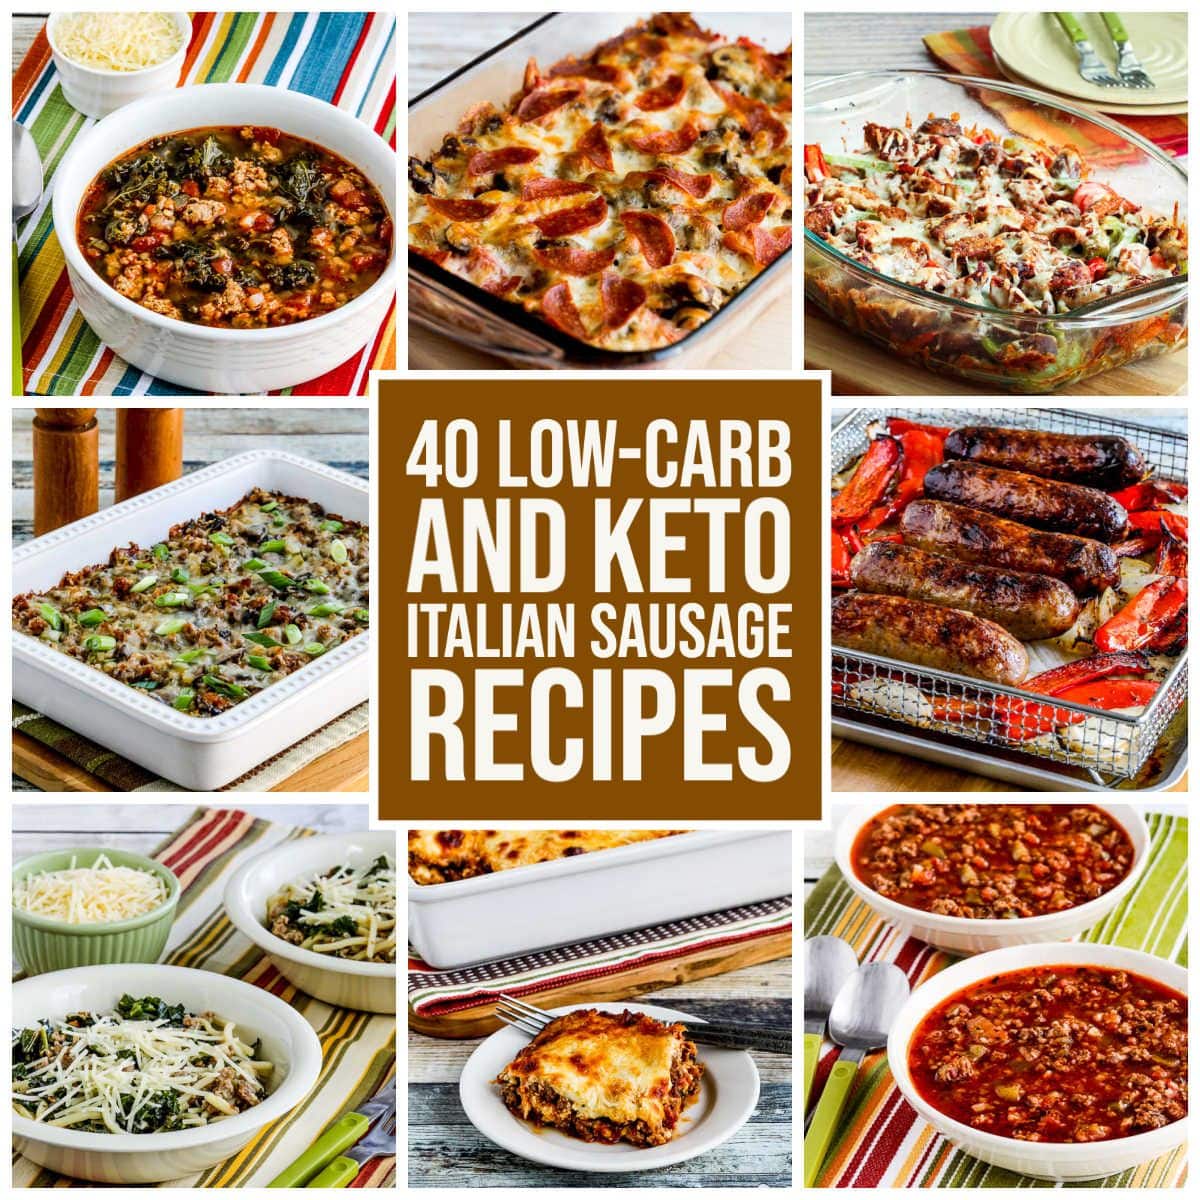 40 Low Carb & Keto Italian Sausage Recipes Collection for Premium Recipes with Text Overlay